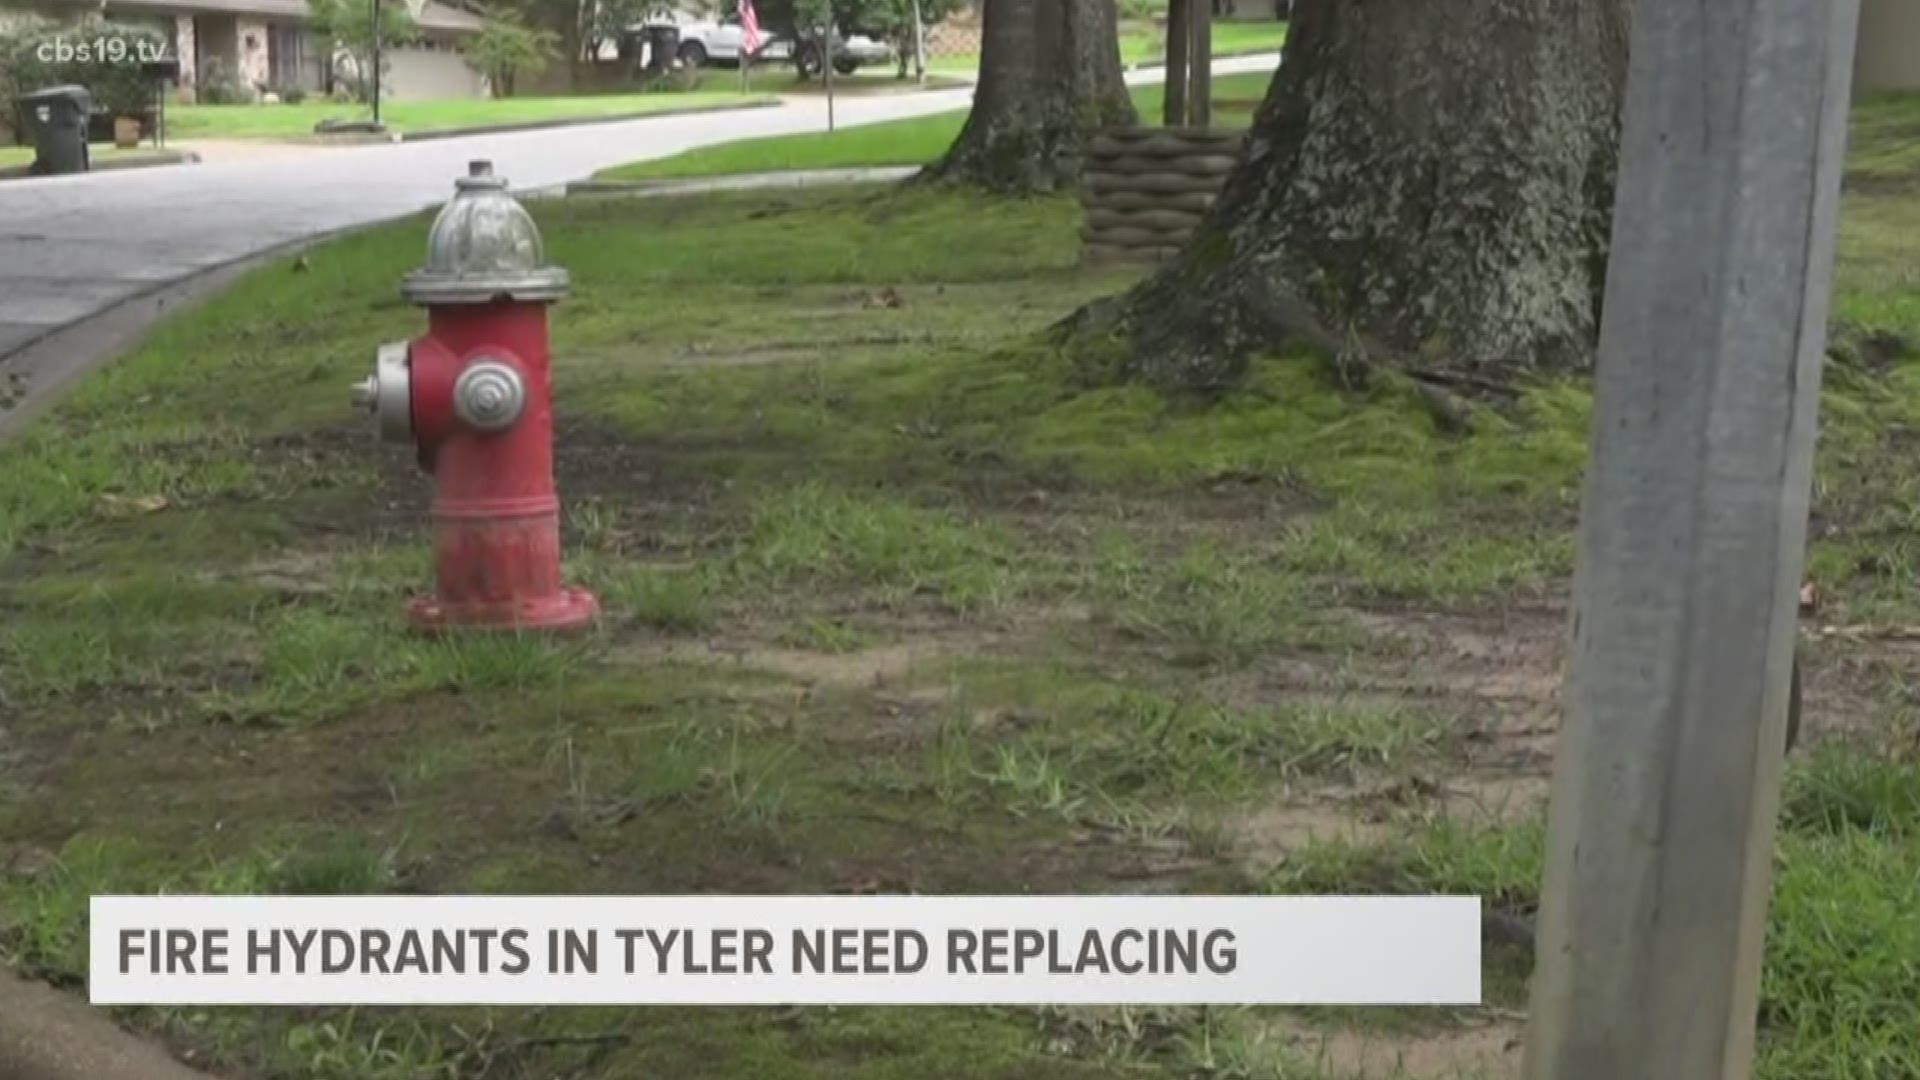 After water started coming up from beneath his fire hydrant, John Burnley started contacting the city. They came out multiple times but it was still an issue. Now his hydrant is replaced and we've heard about other hydrants in the city needing to be replaced.